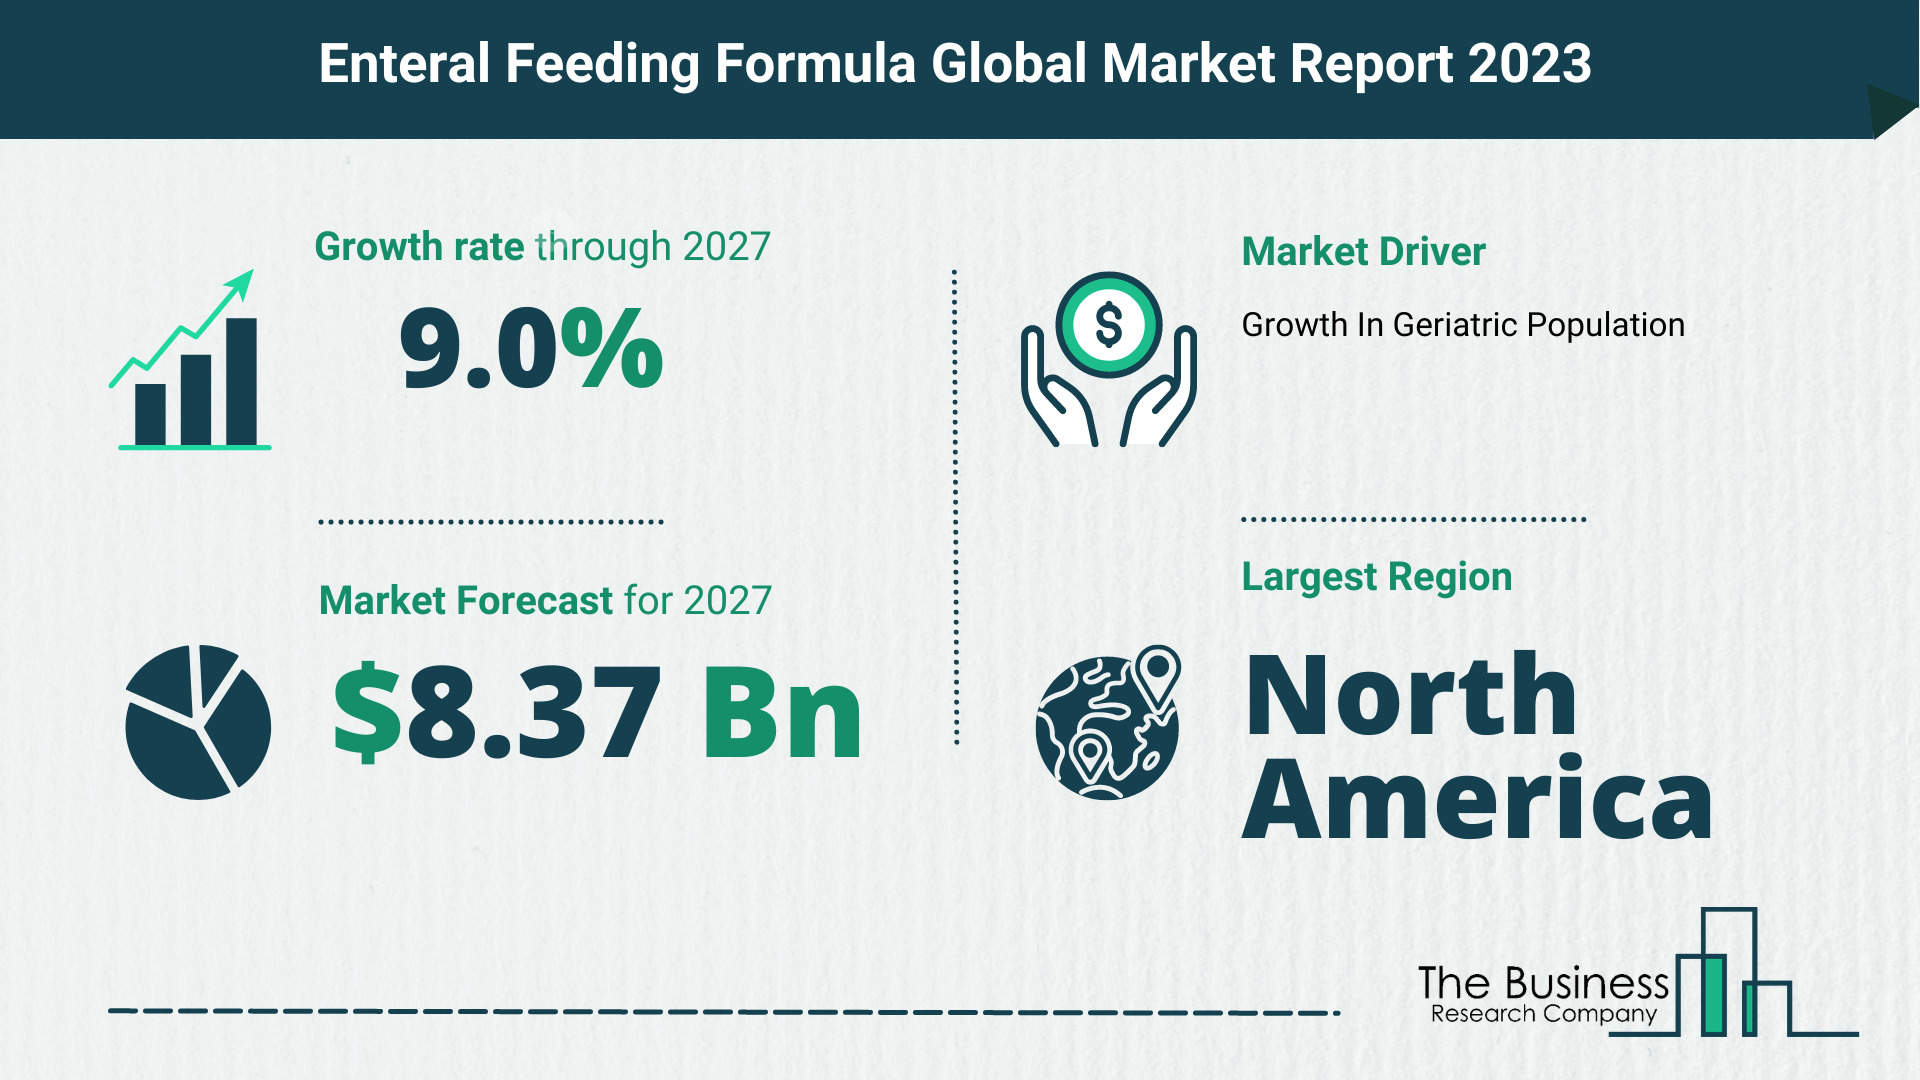 How Will The Enteral Feeding Formula Market Globally Expand In 2023?